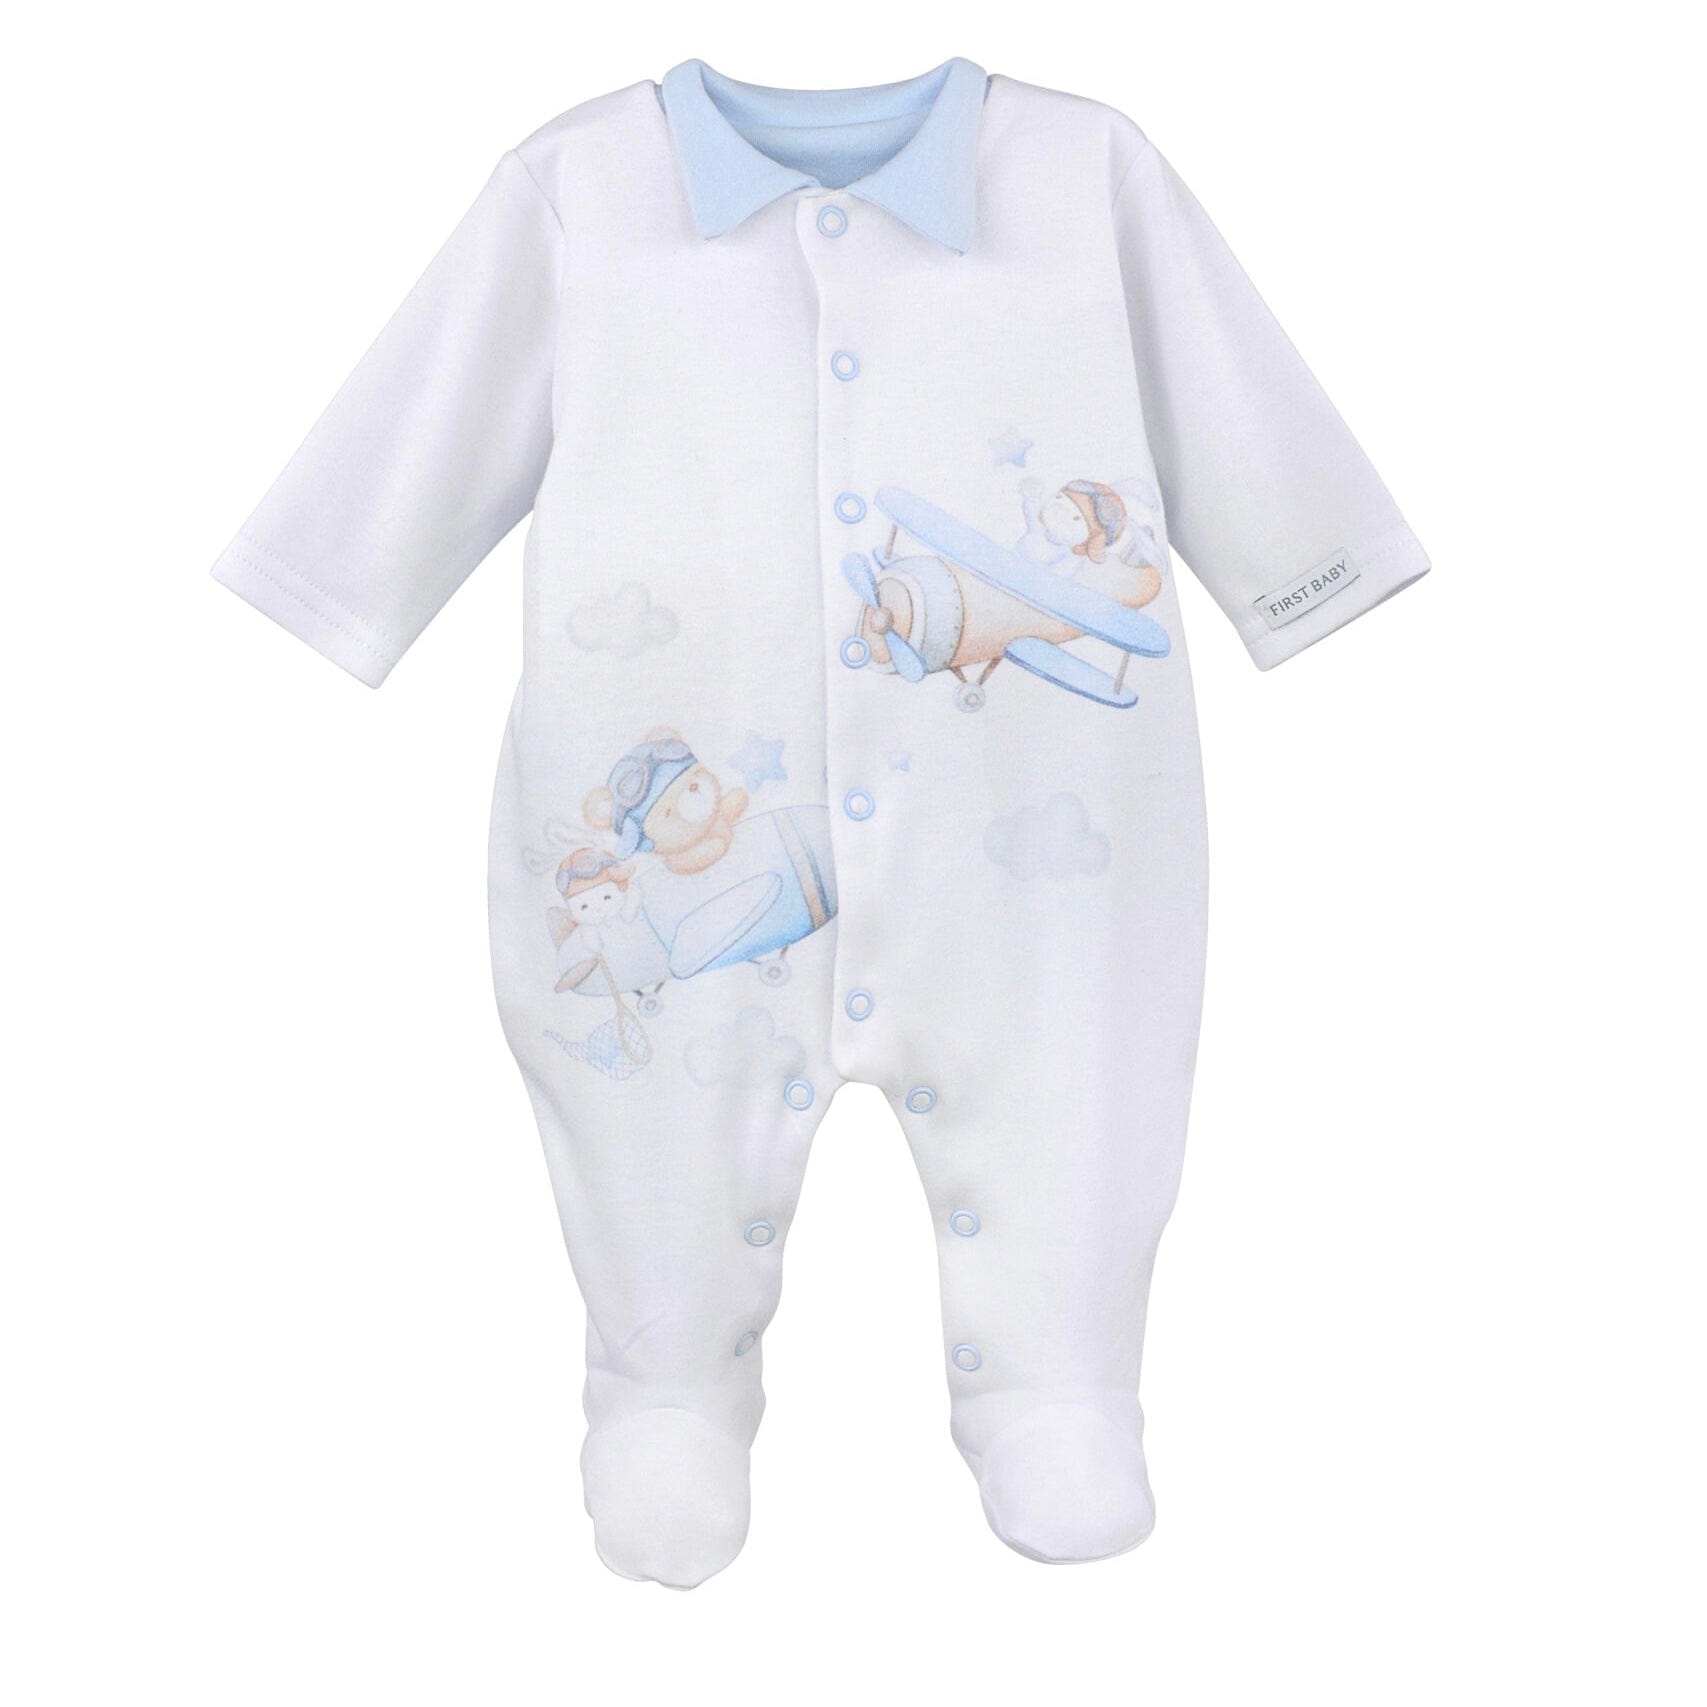 FIRST BABY - Planes Babygrow With Collar - Blue